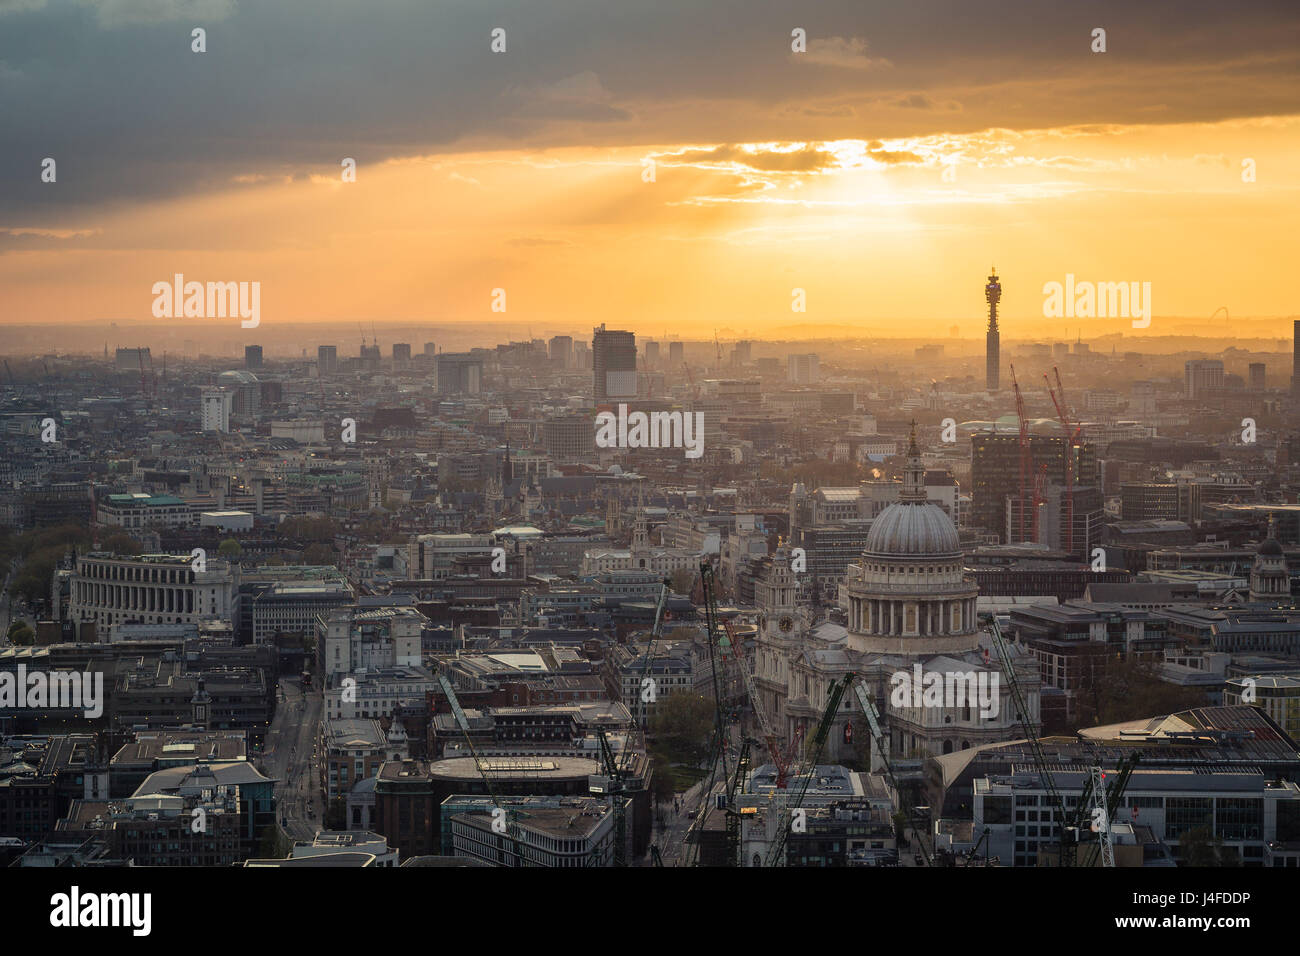 London skyline with St. Paul's Cathedral in foreground before sunset Stock Photo